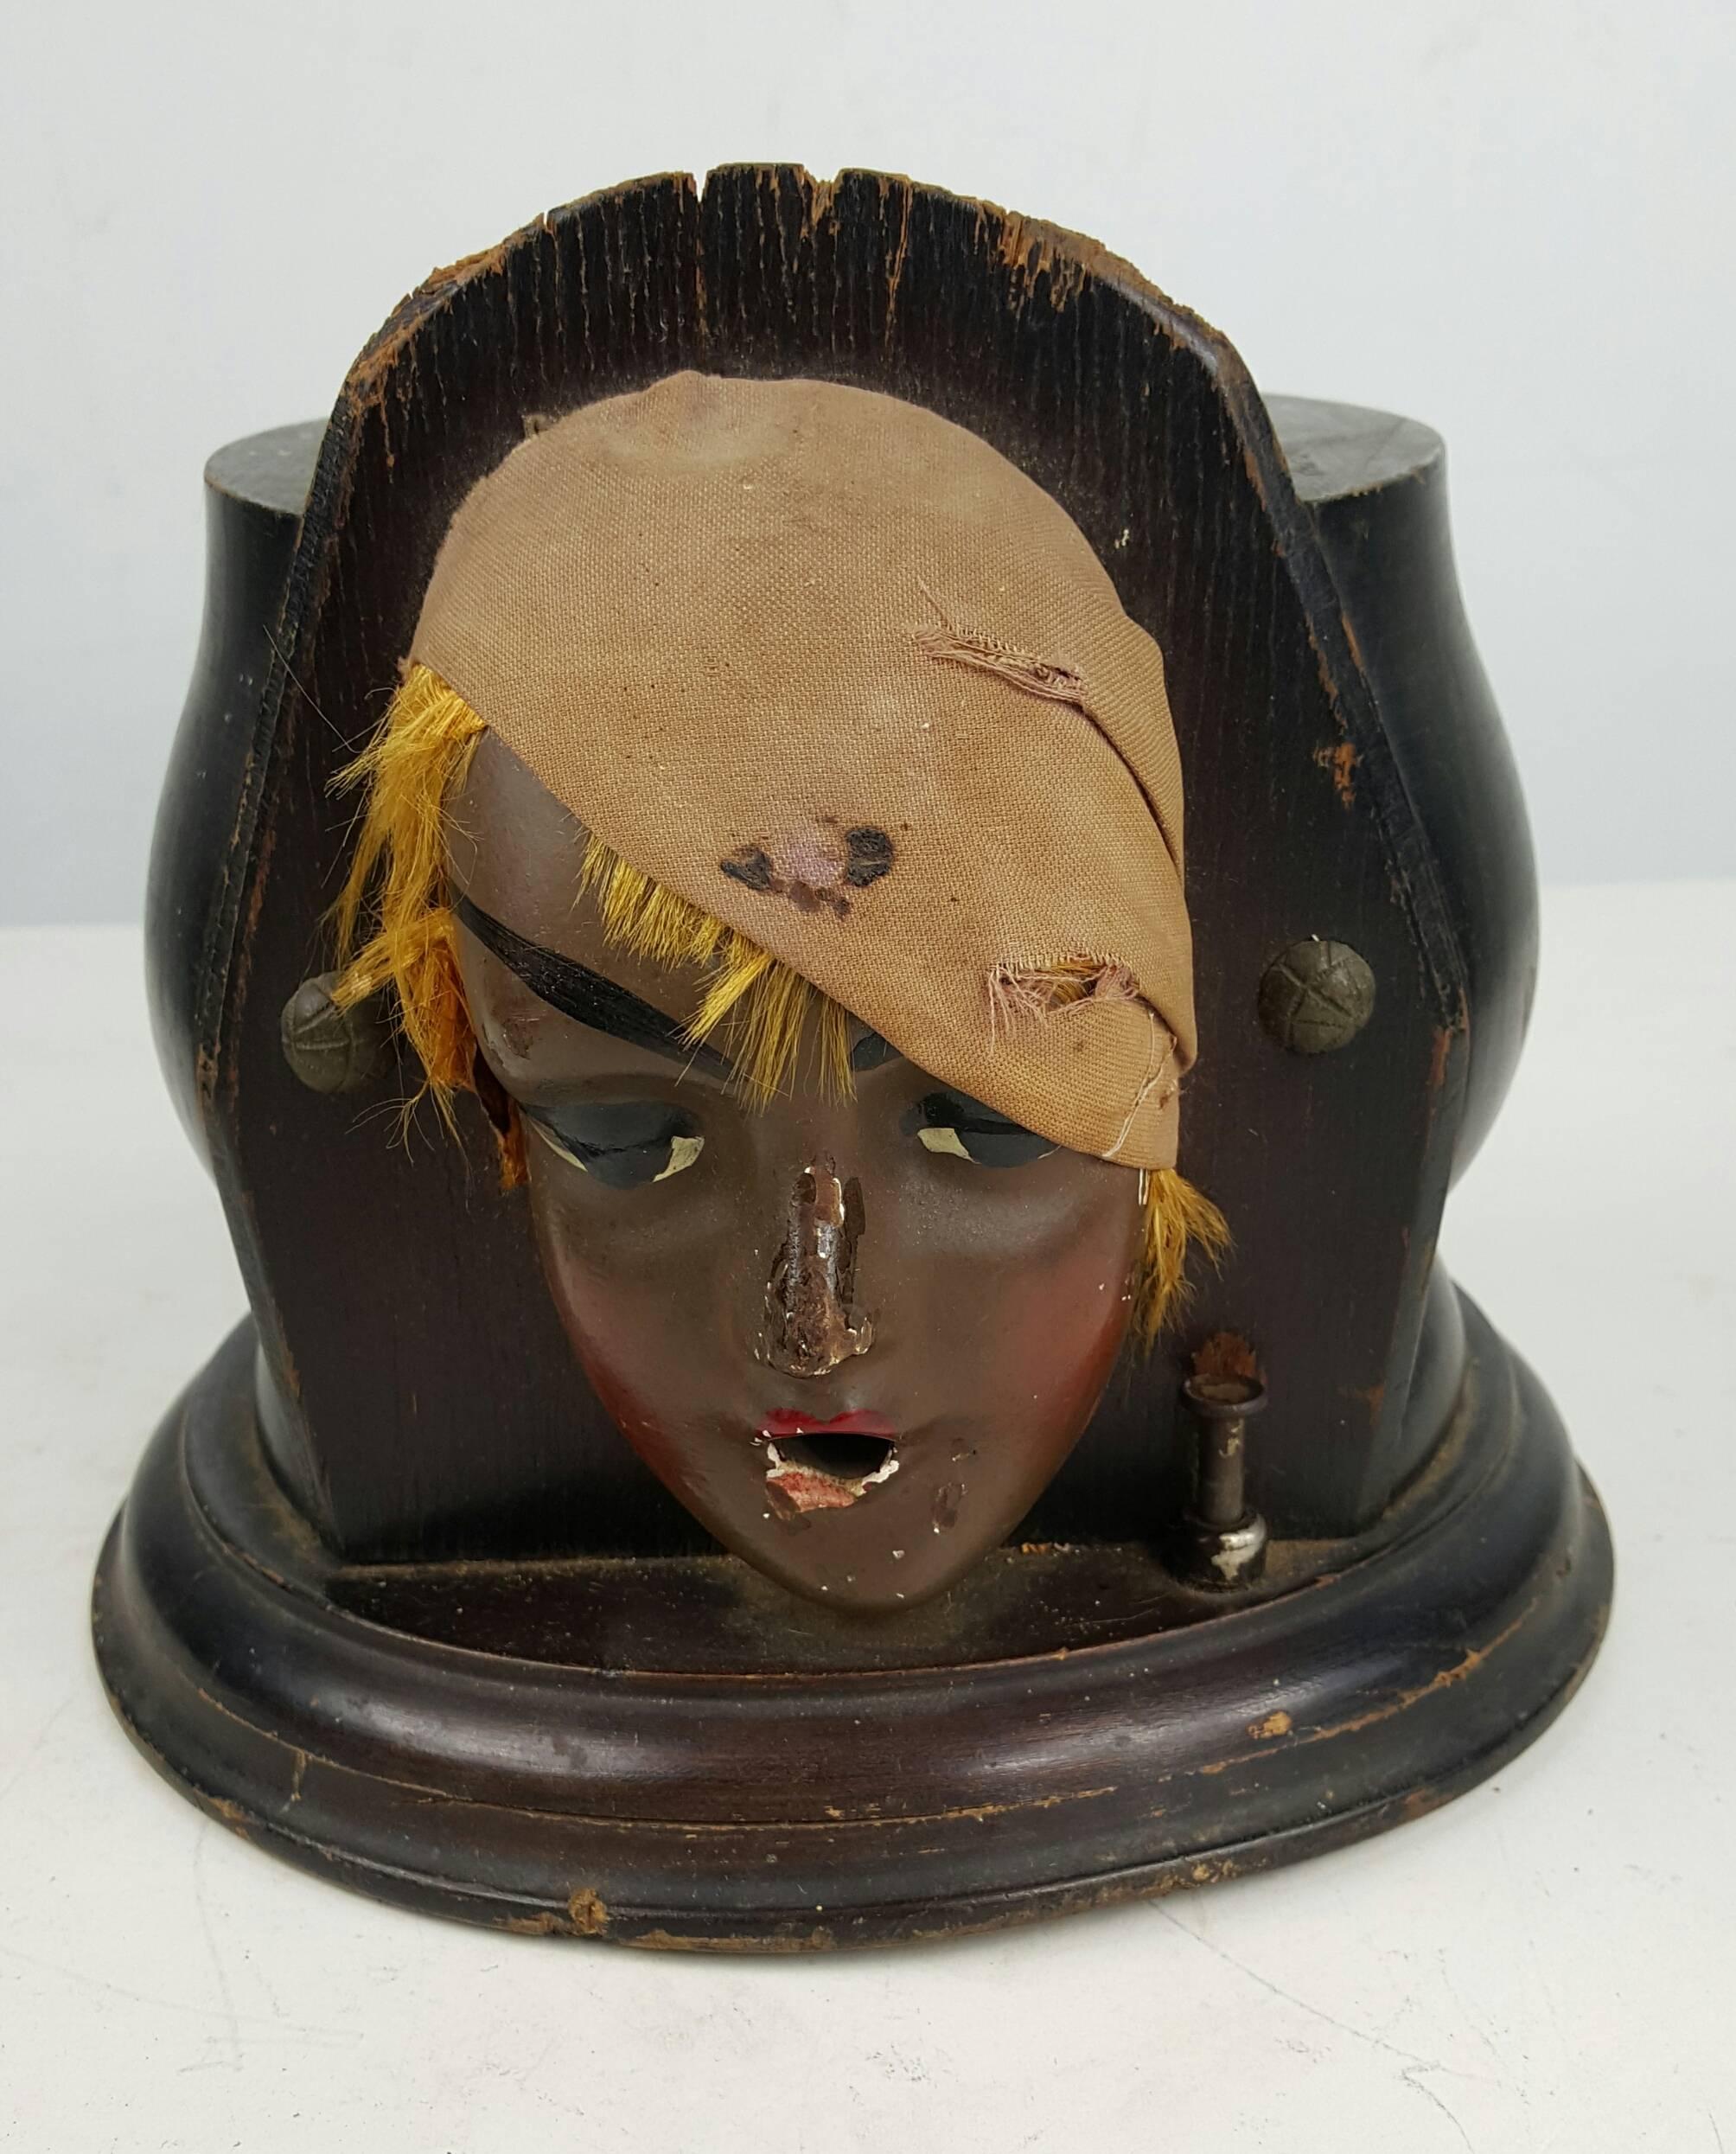 Cigarette dispenser, Flapper Lady, Turban Flapper cigarette dispenser, American, circa 1920s. Carved wood with composition and cloth depiction of 